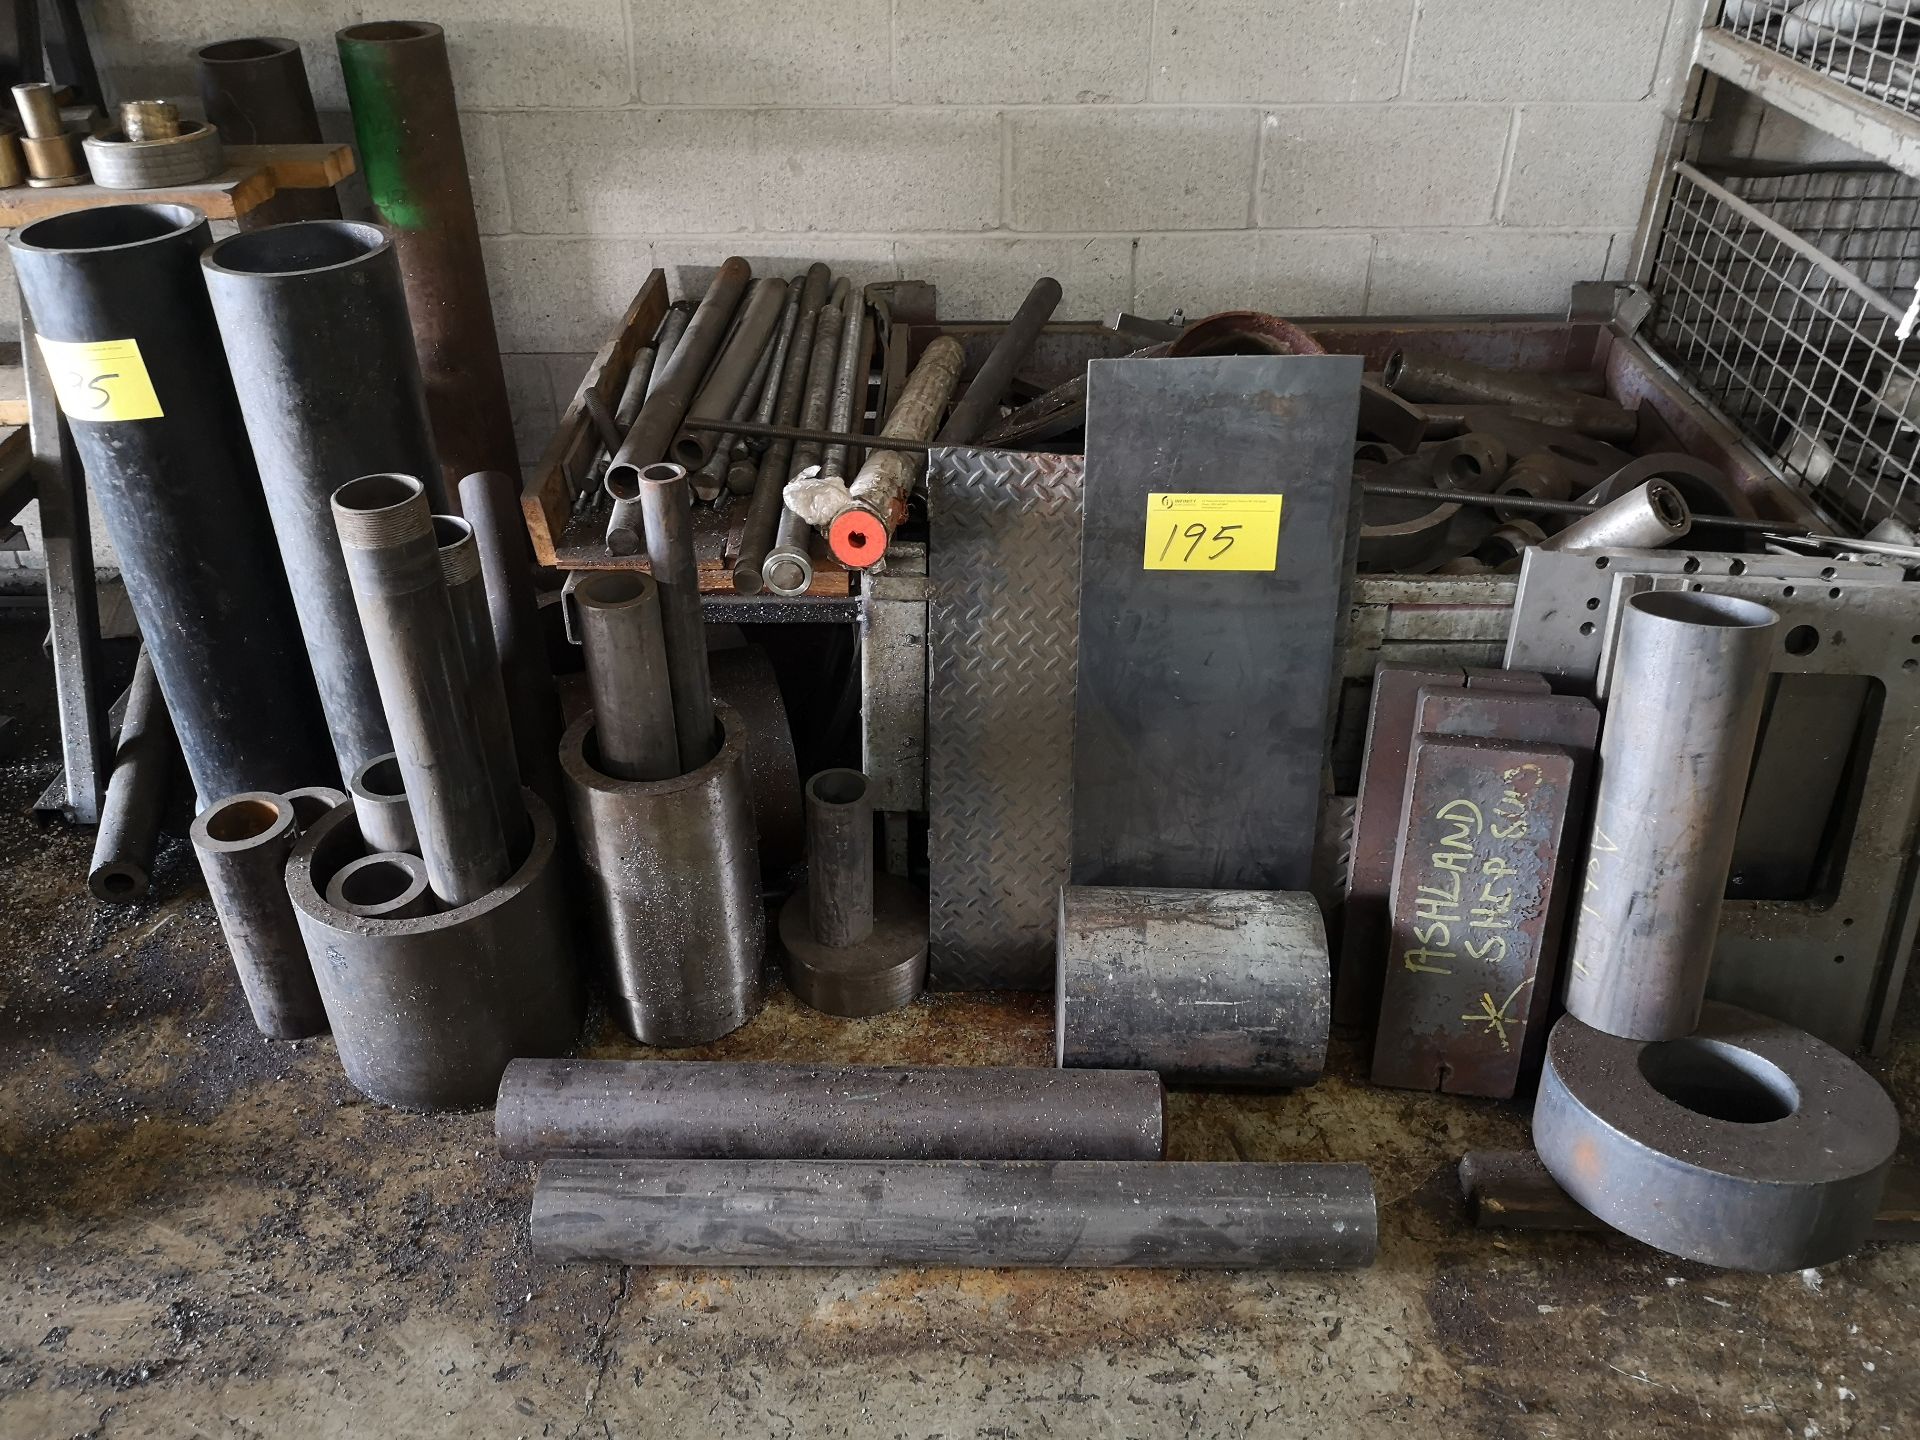 LOT STEEL OFFCUTS AND SCRAP